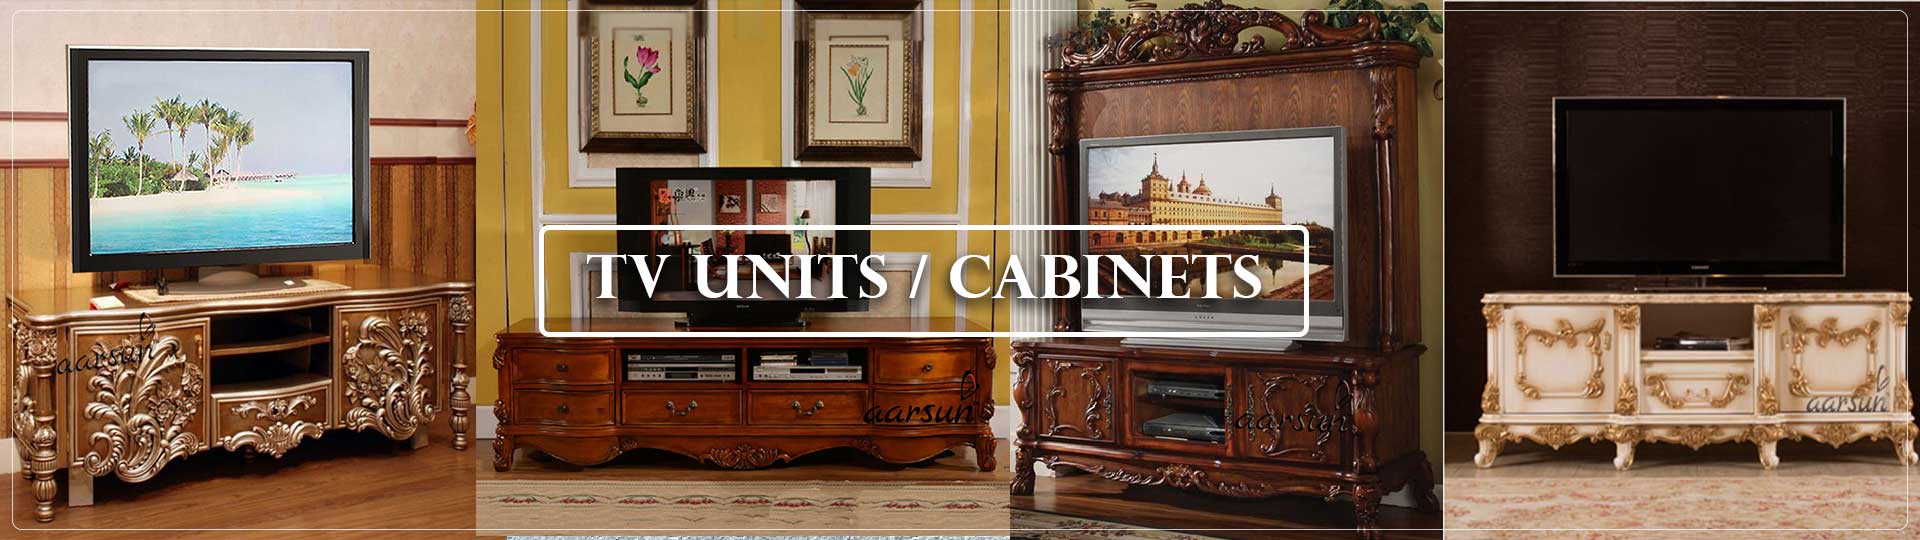 Aarsun TV Units Cabinets